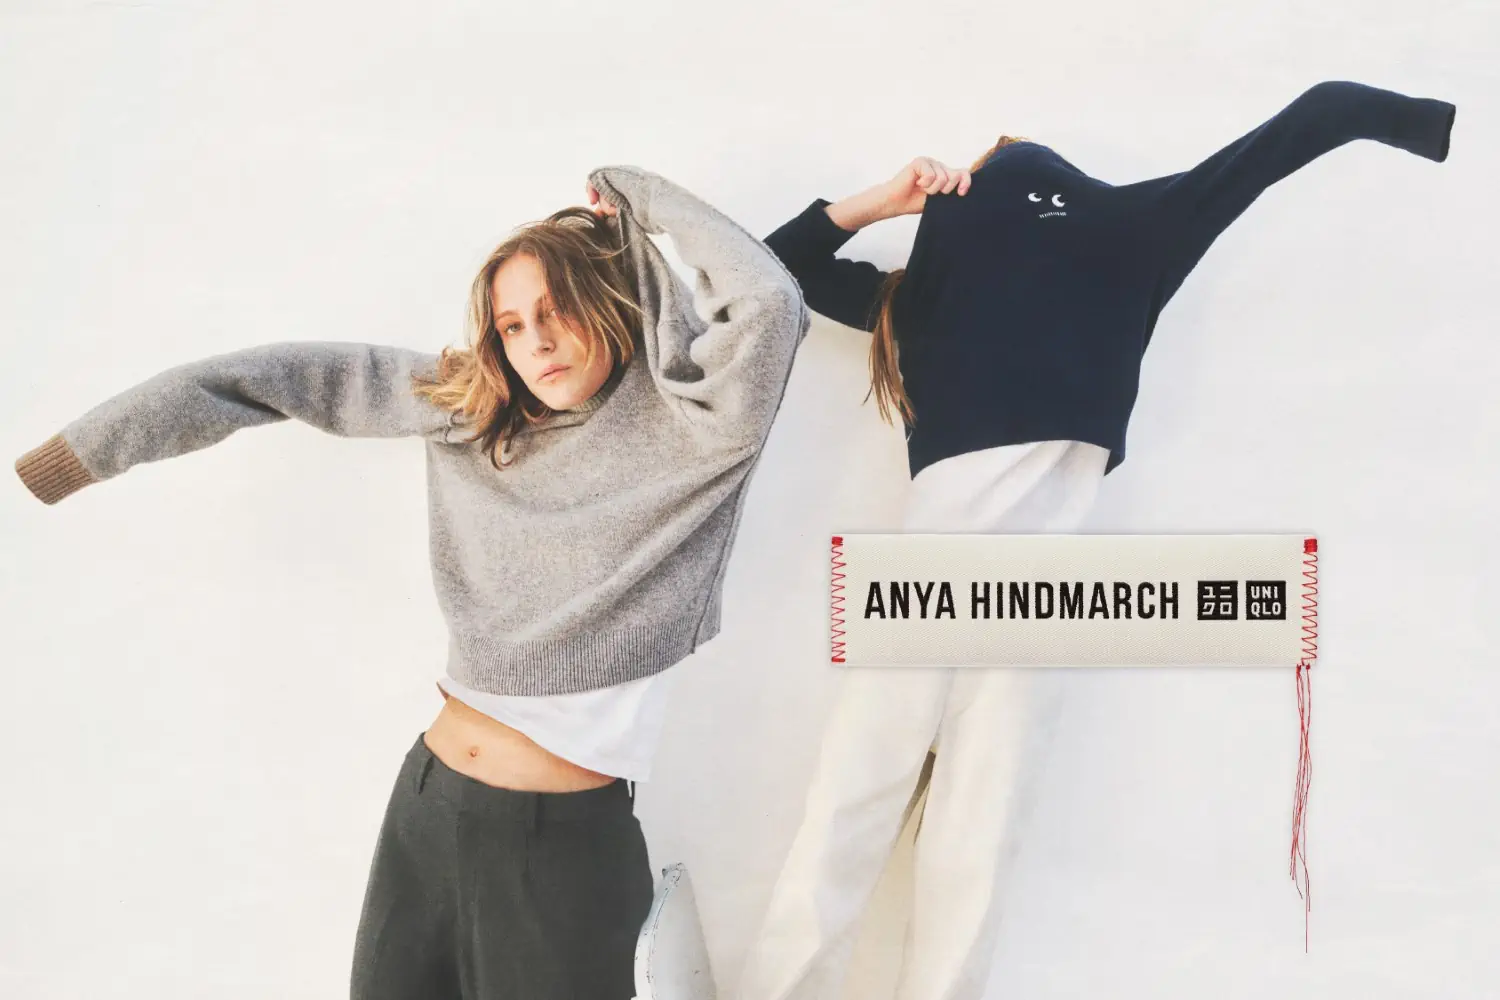 Uniqlo x Anya Hindmarch's first collaboration fuses style and innovation